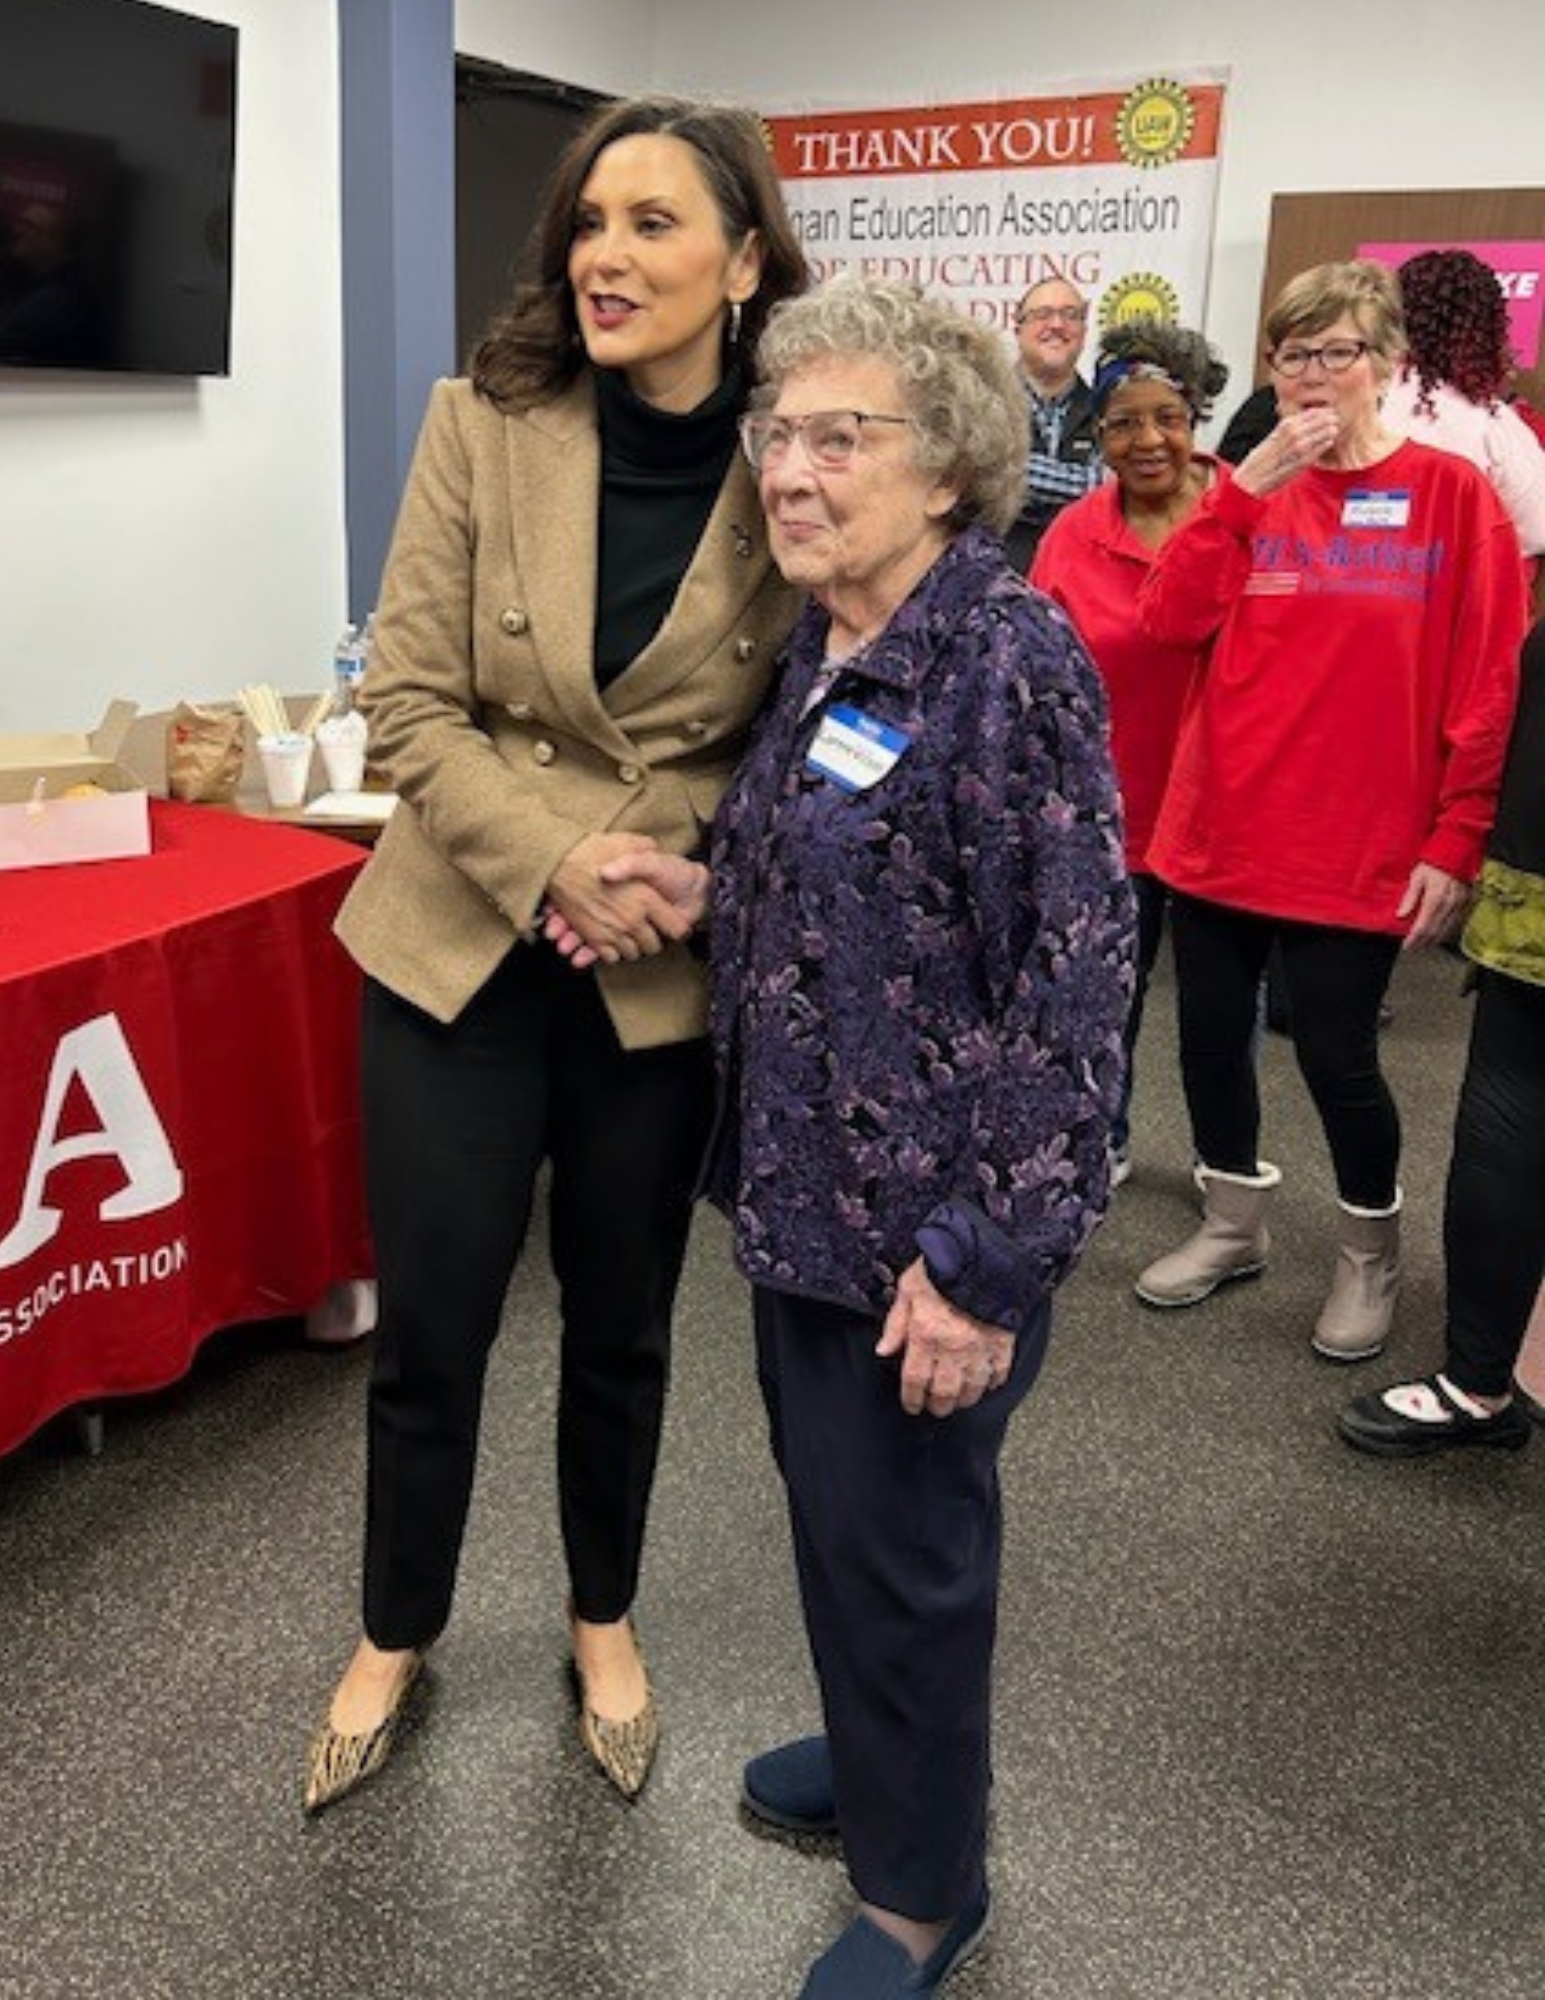 A photo of Governor Whitmer smiling with Lorene Wilson.